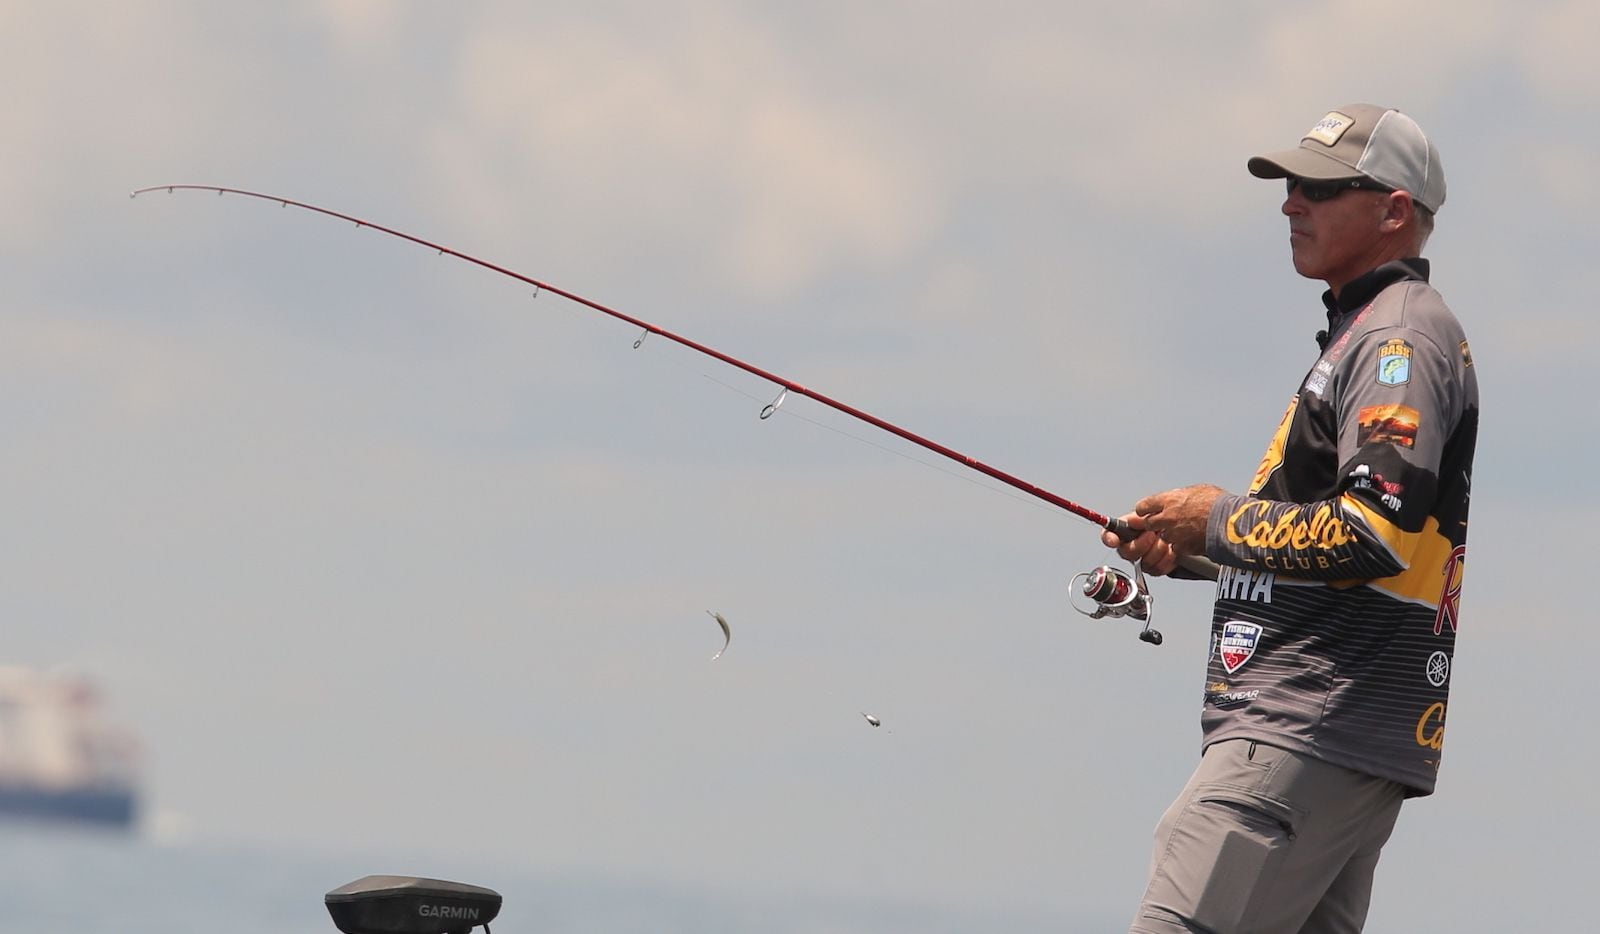 Texas bass pro Clark Wendlandt of Leander led the Elite Series Angler of the Year points...